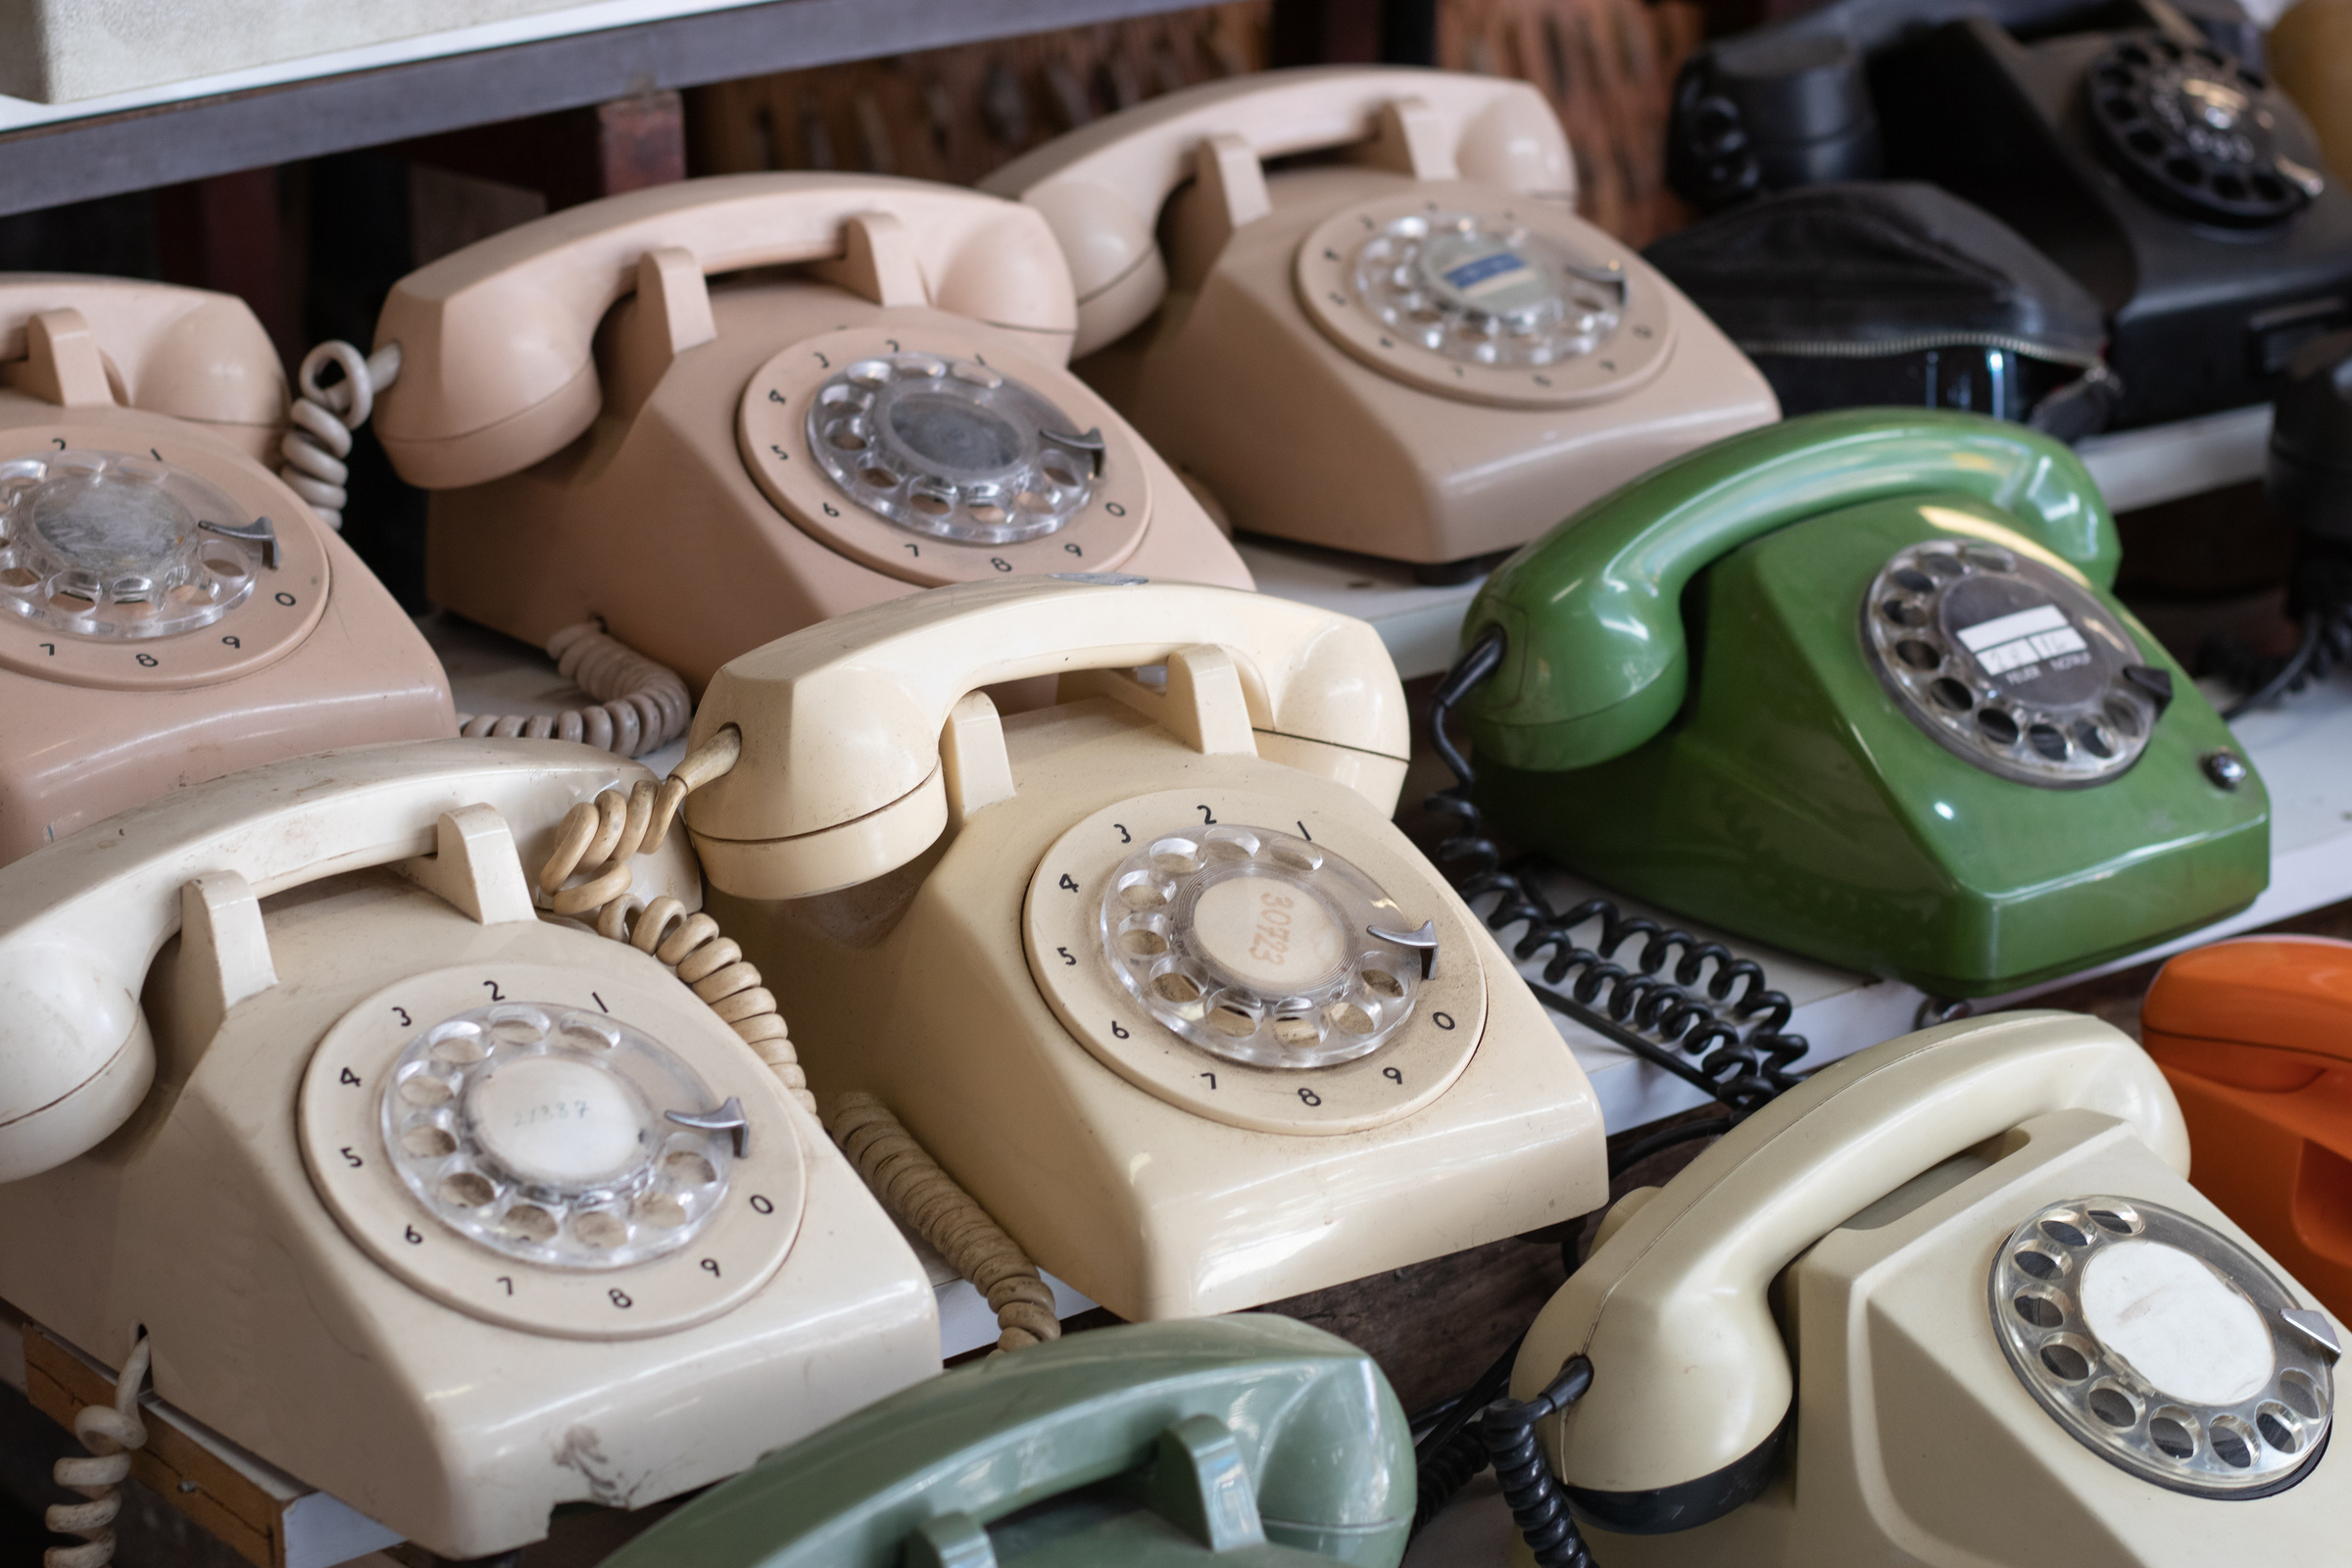 Landline rotary phones. Vintage technology concept. Photography of the several retro phones.